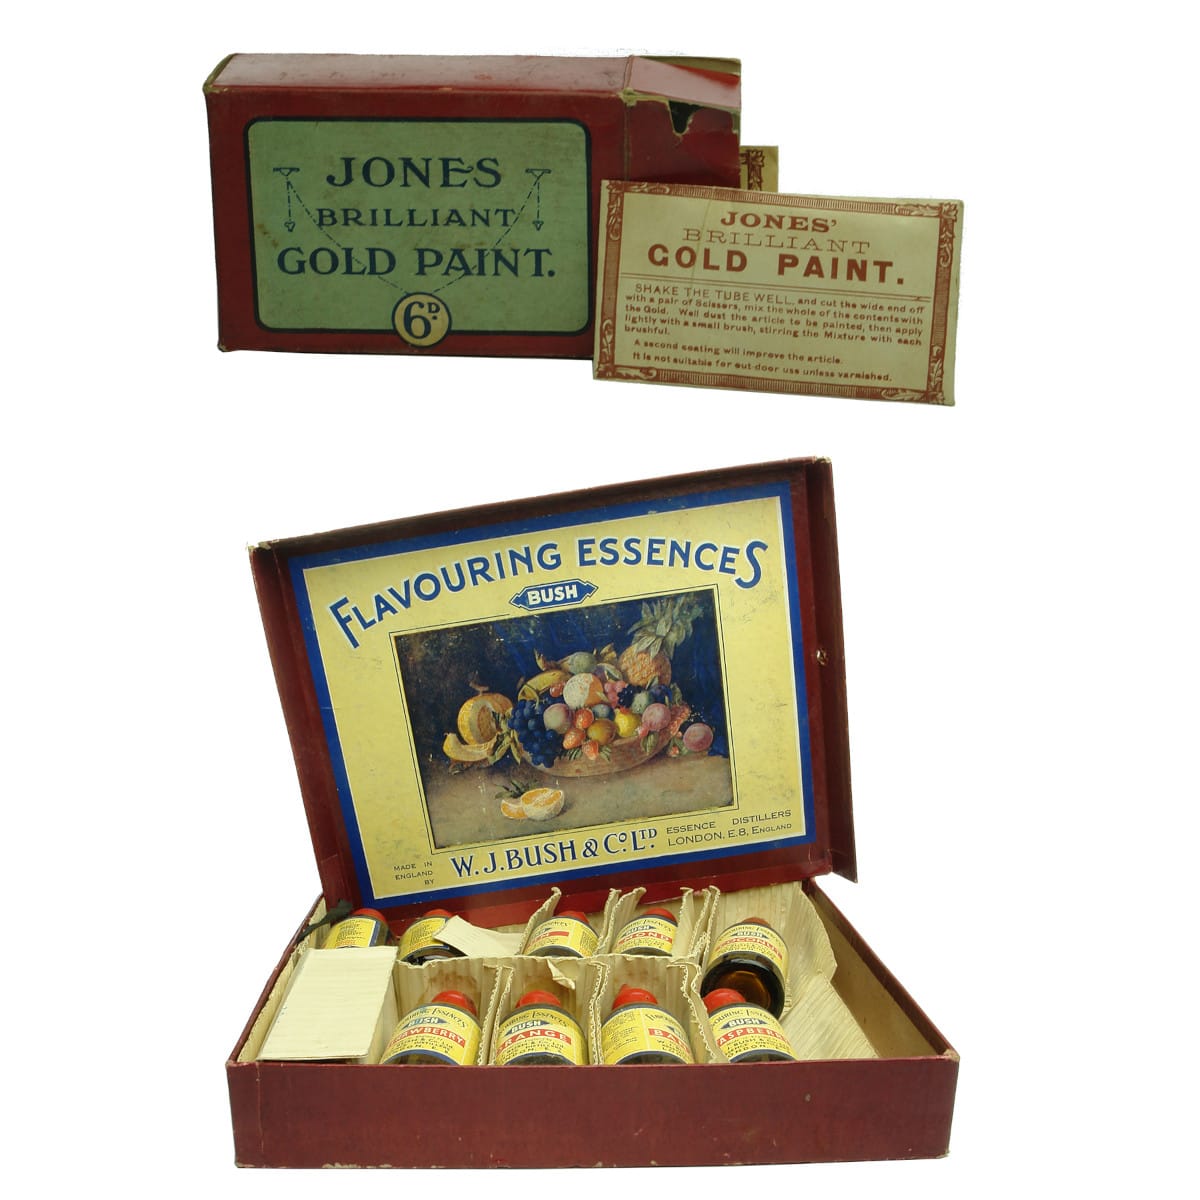 2 lots of packaging with bottles etc. 10 W. J. Bush Flavouring Essences; Jones Brilliant Gold Paint Packet with sachets and palette.